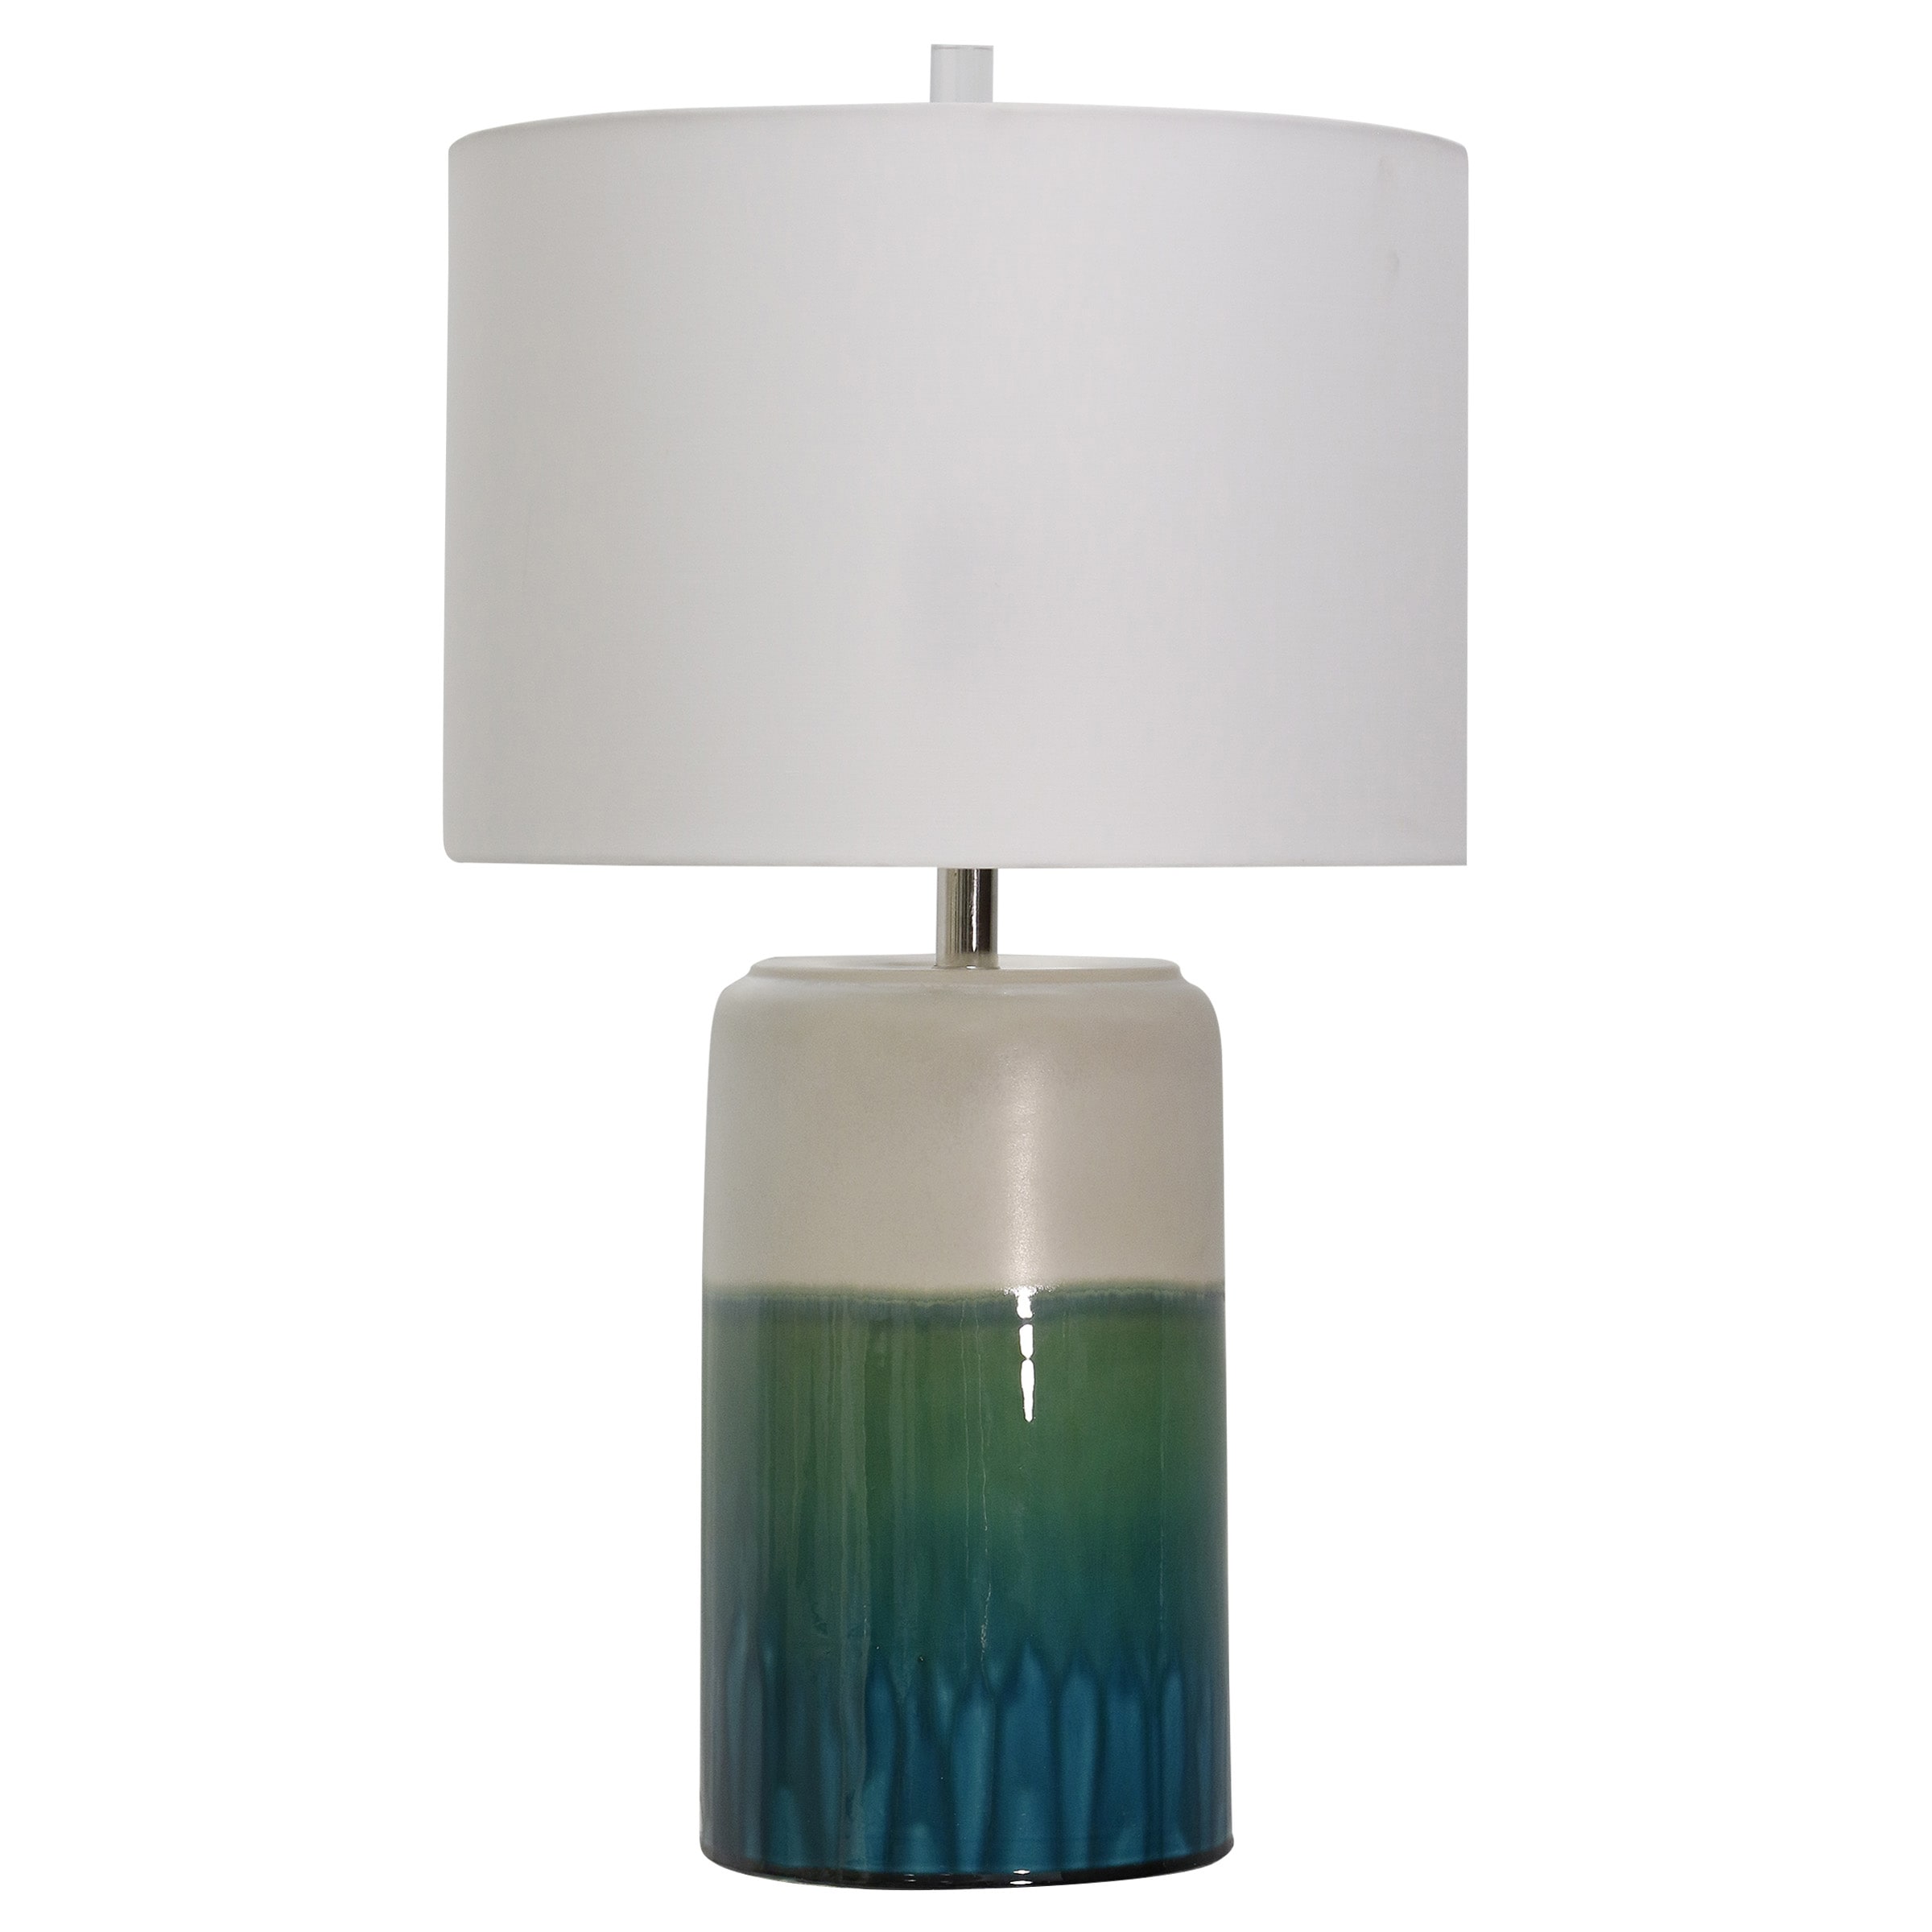 Coastal Table Lamps at Lowes.com